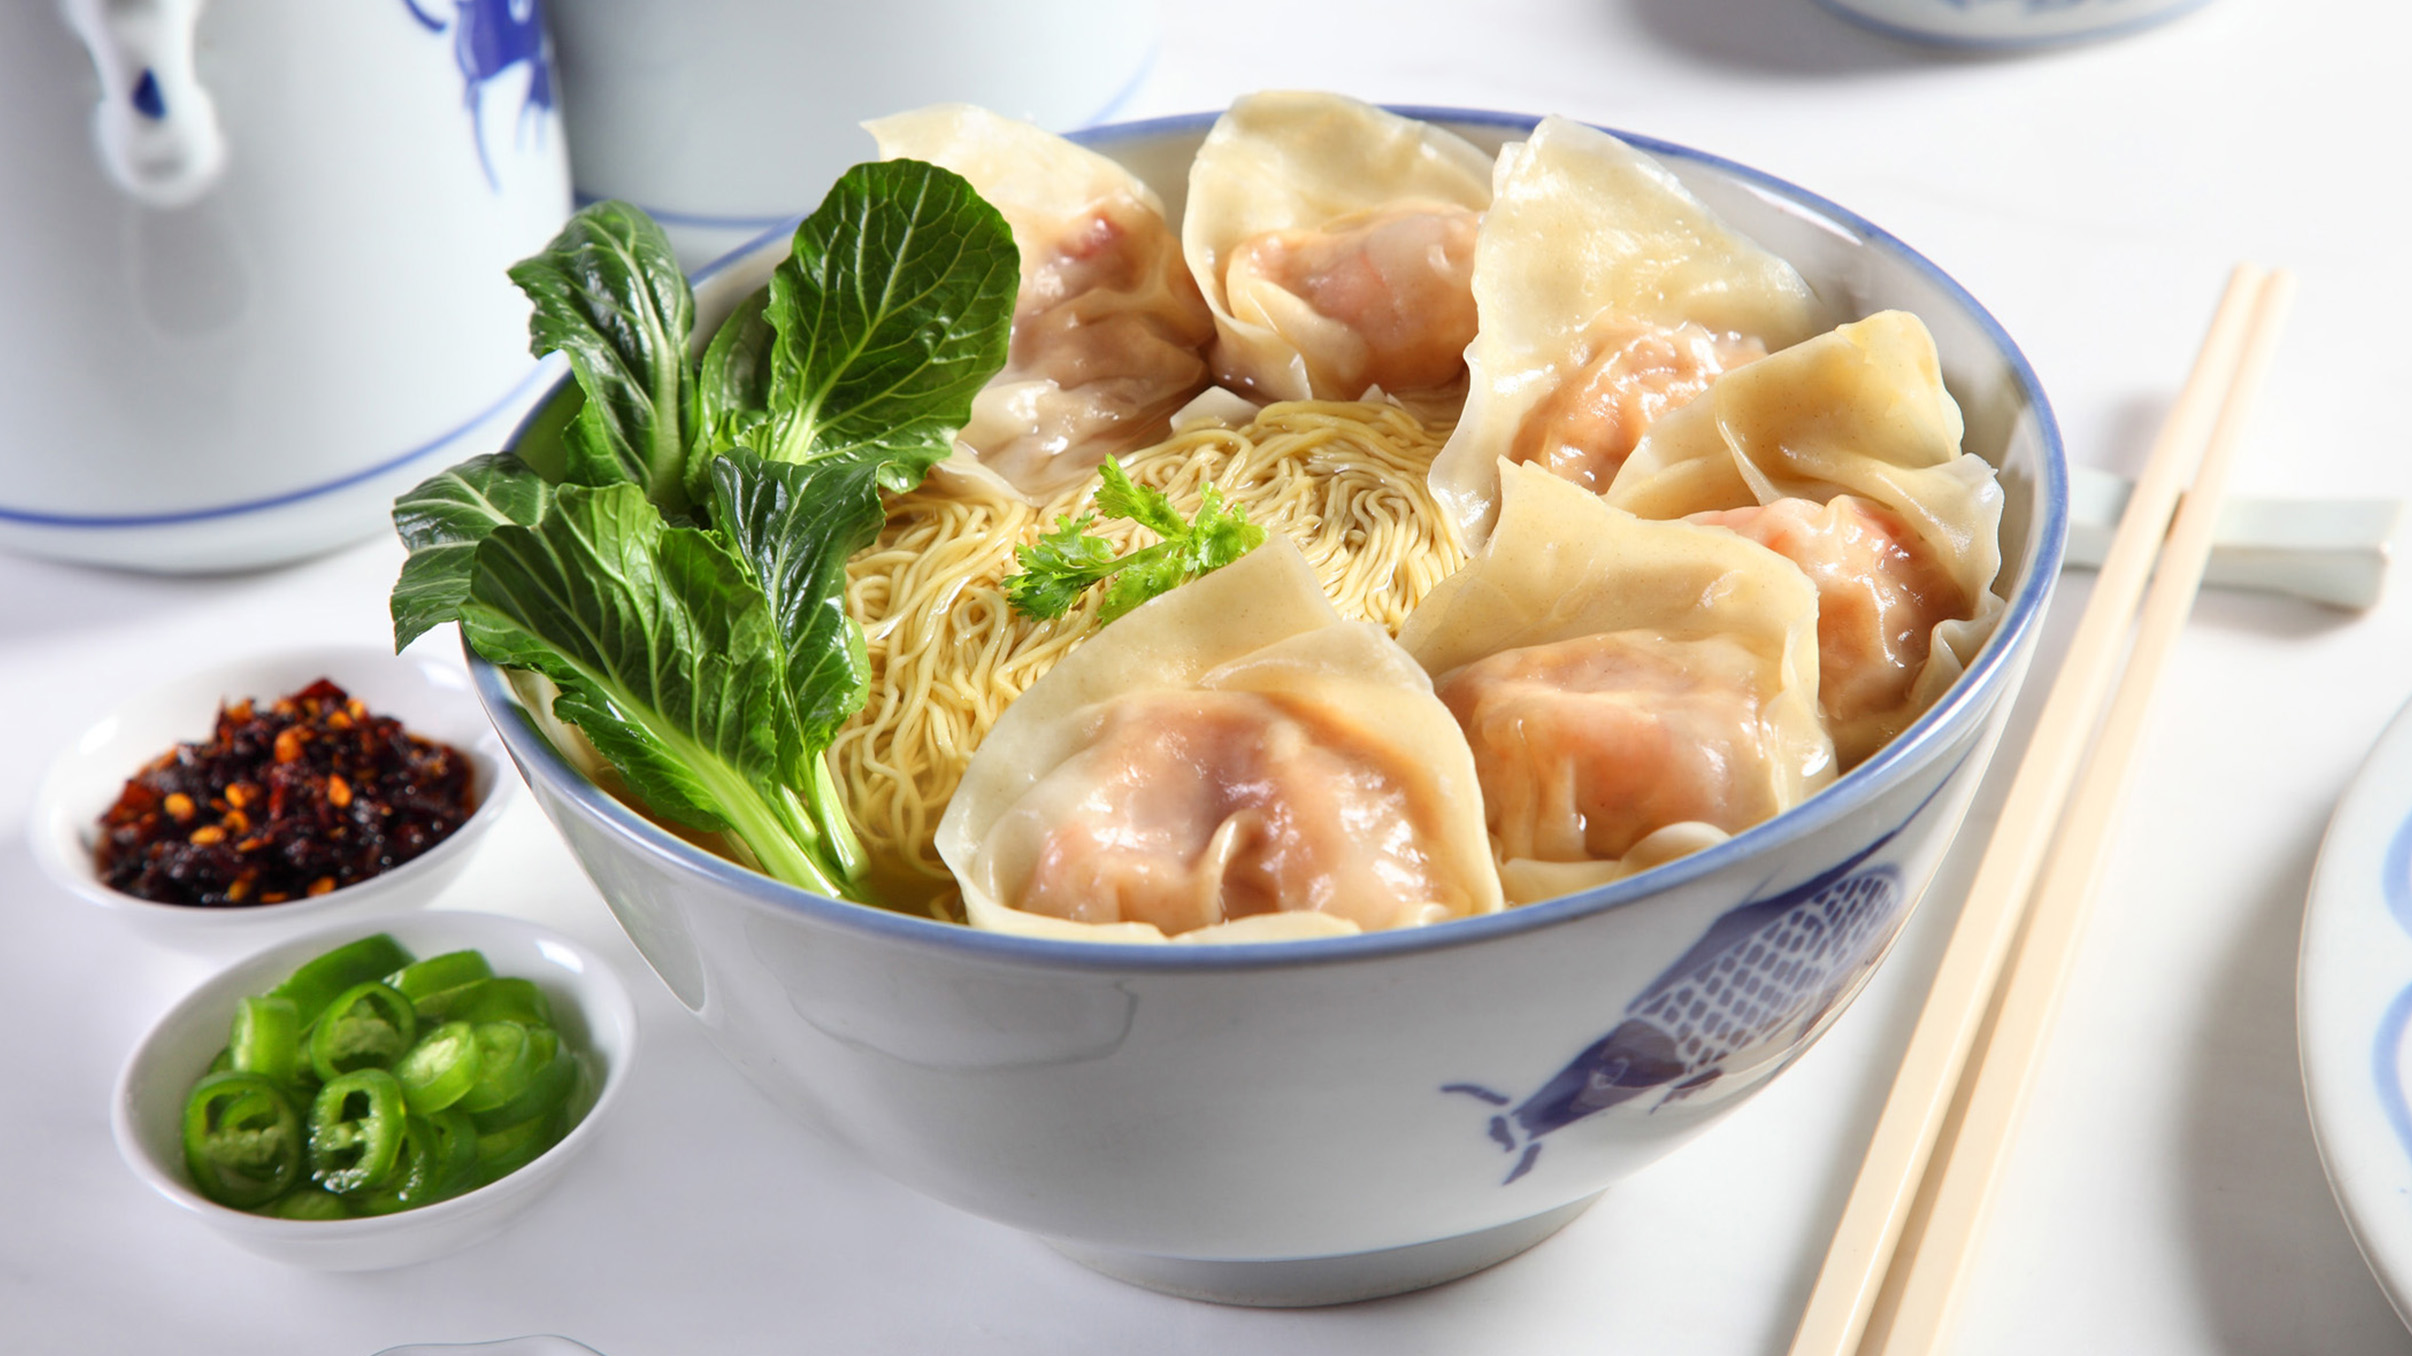 Wanton noodles from 8 Noodles